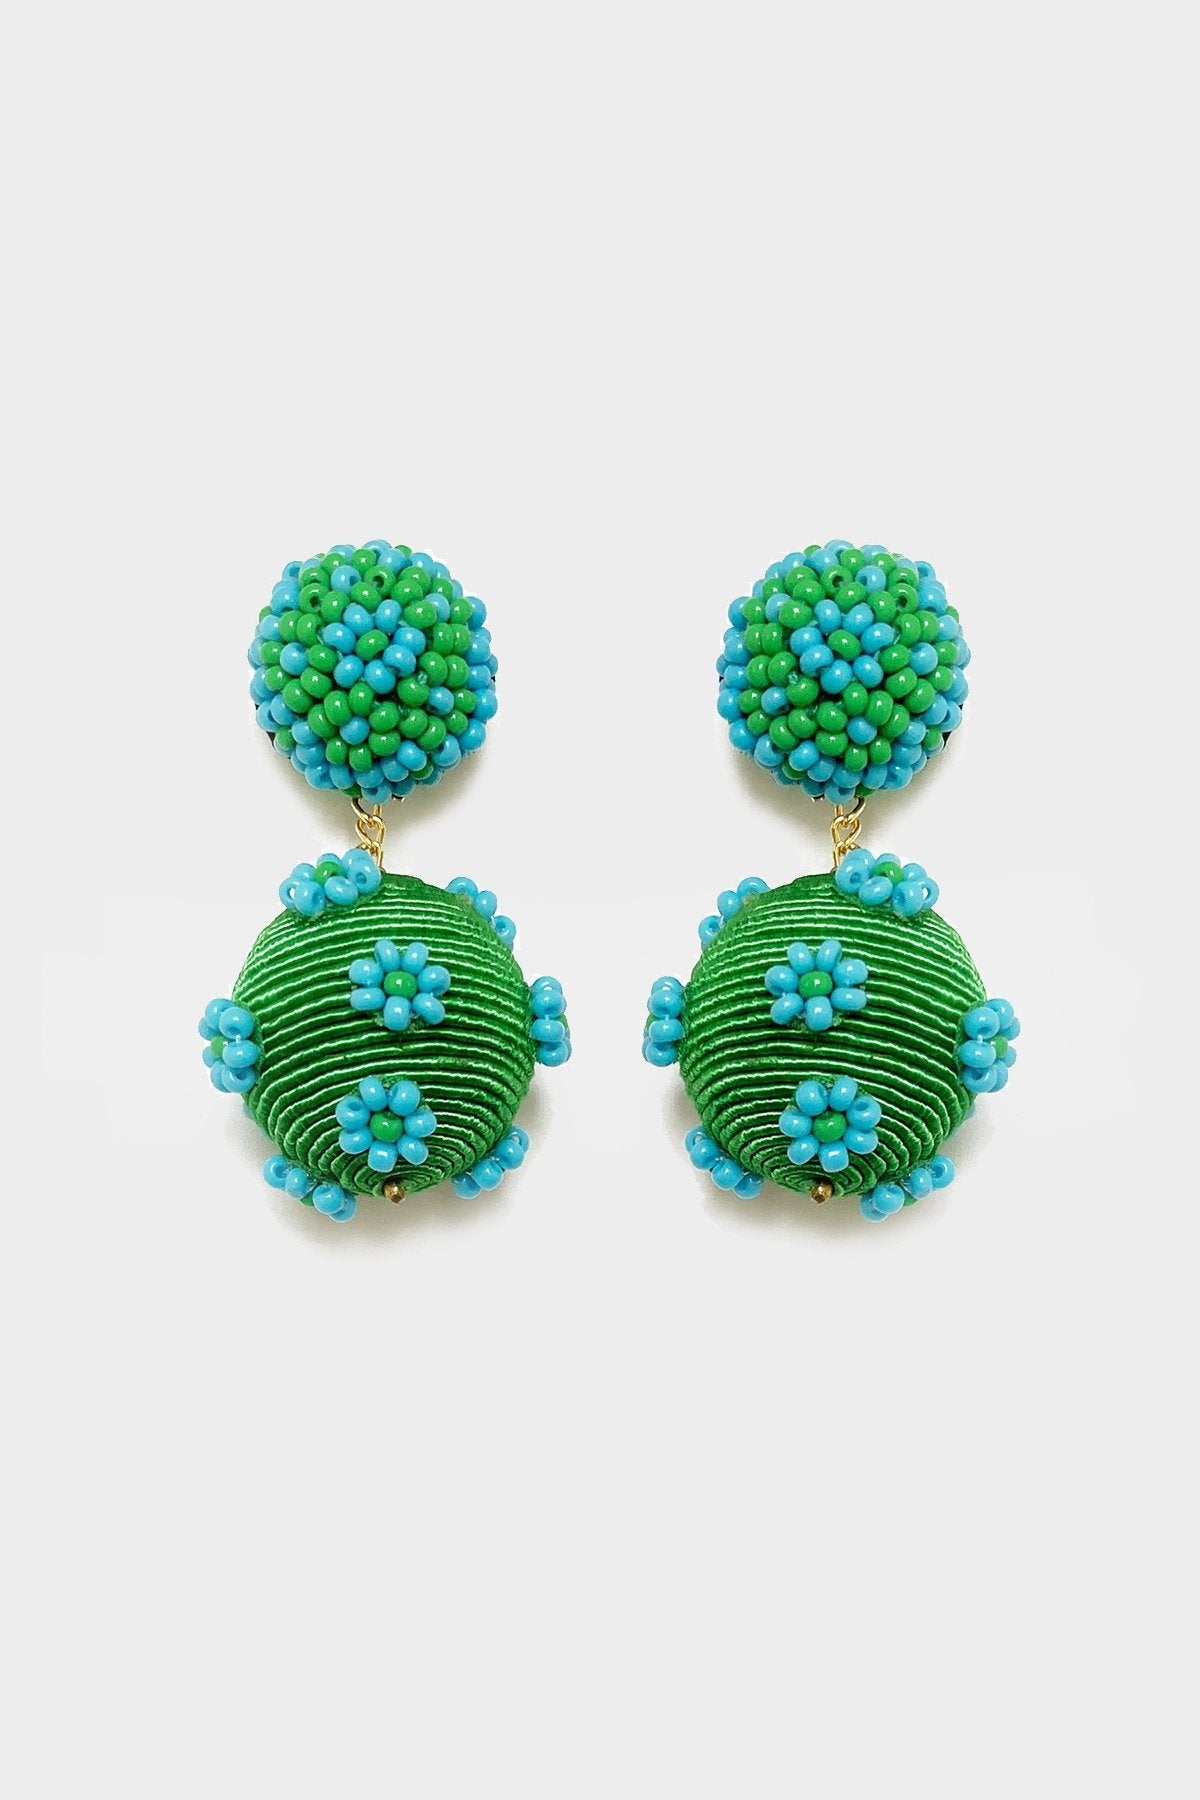 Marguerite Gumball Earrings in Green Turquoise - shop-olivia.com